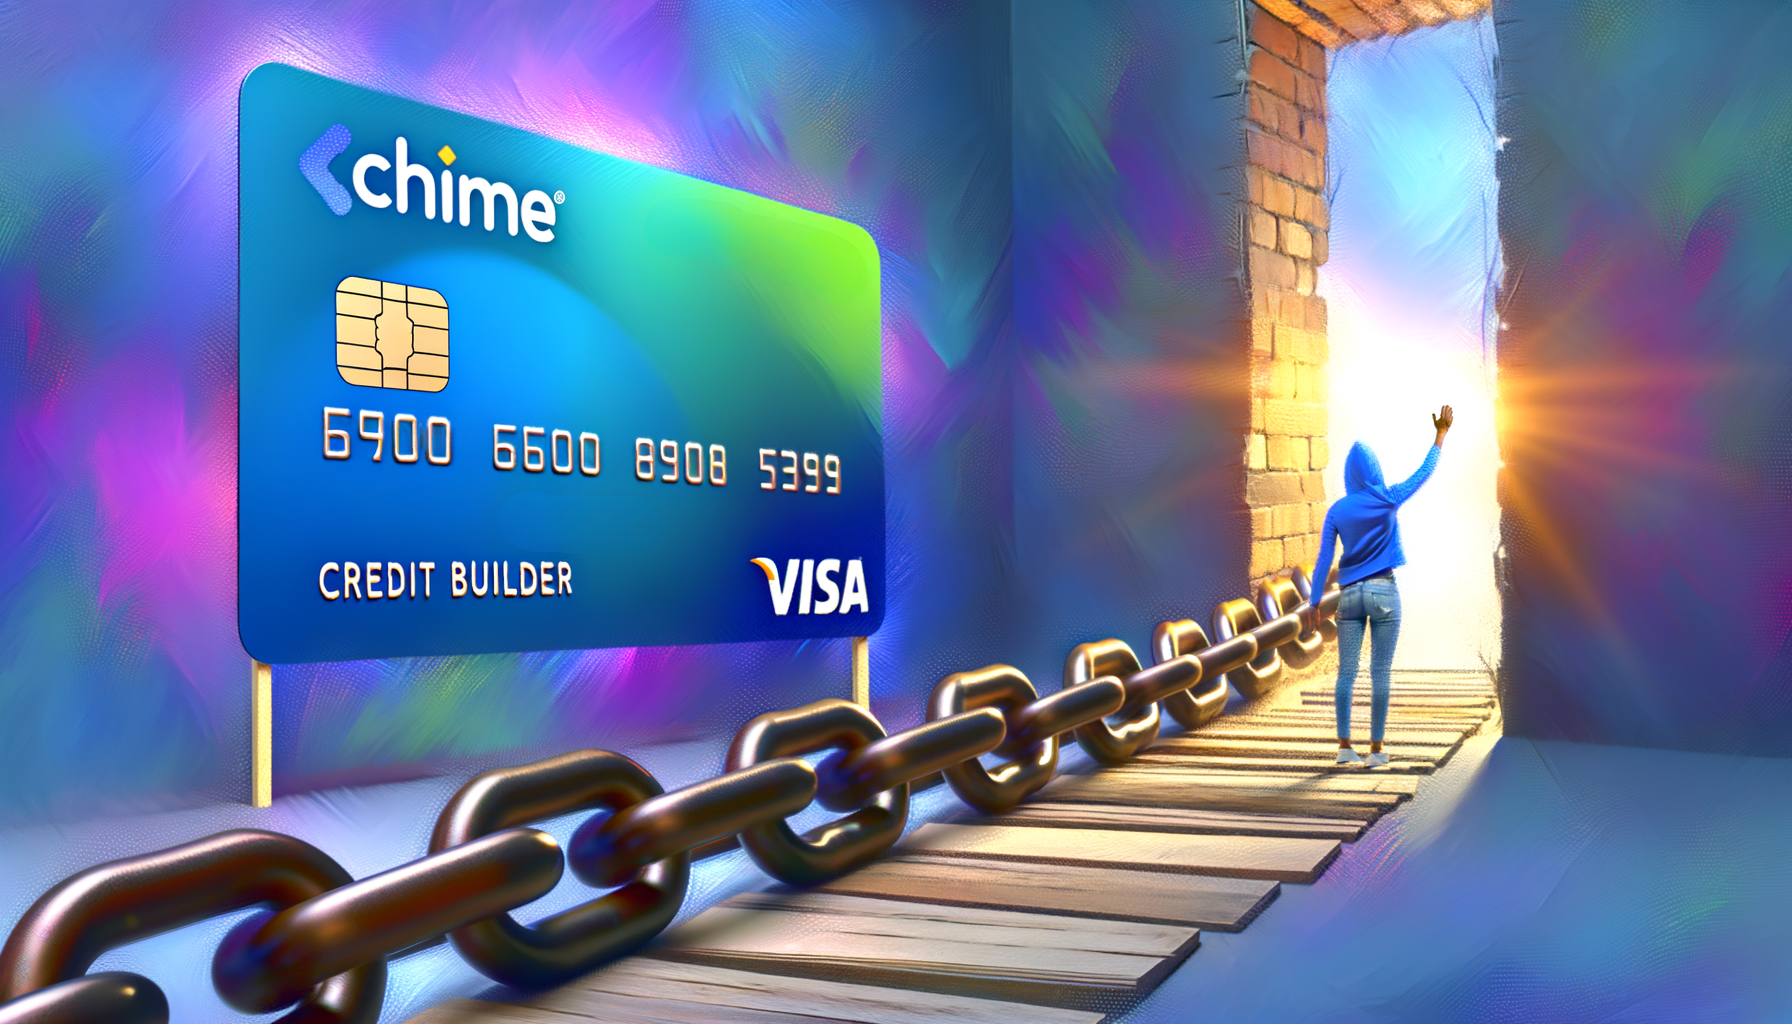 Chime Credit Builder Card cover